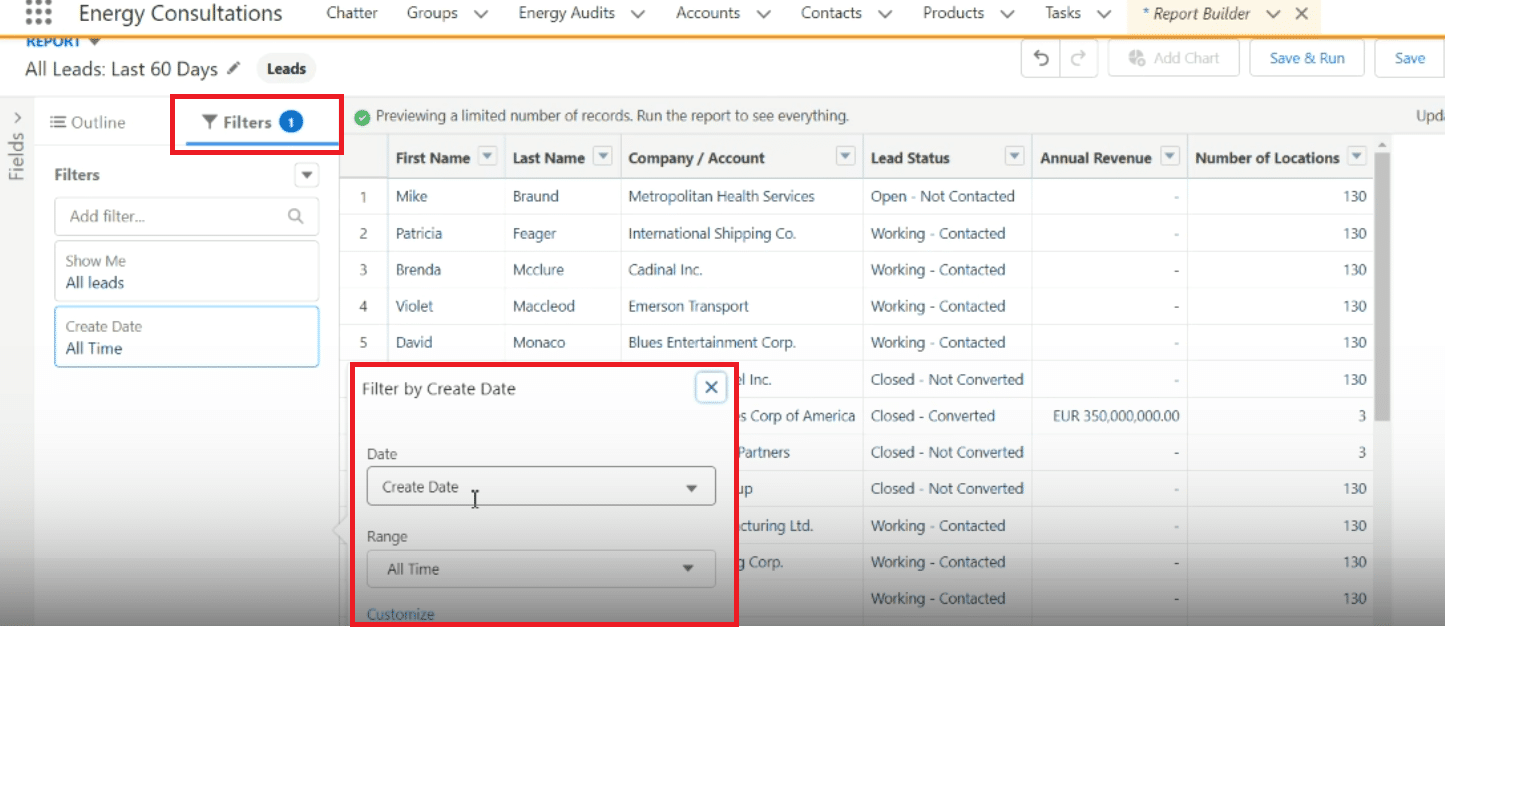 Accessing filter settings in a Salesforce report